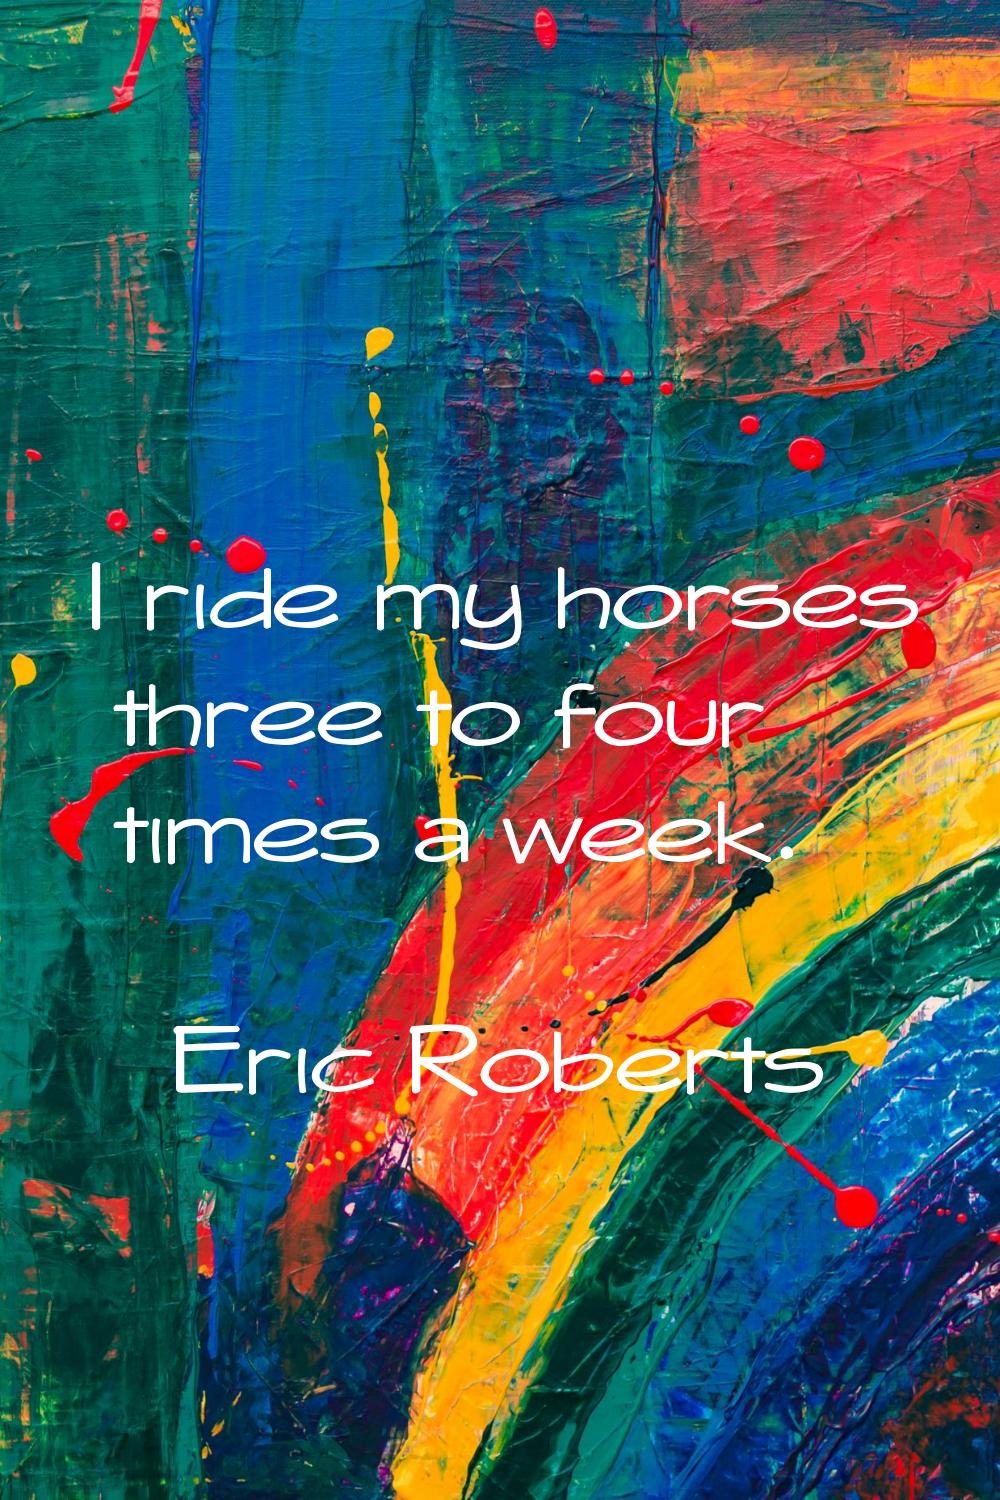 I ride my horses three to four times a week.